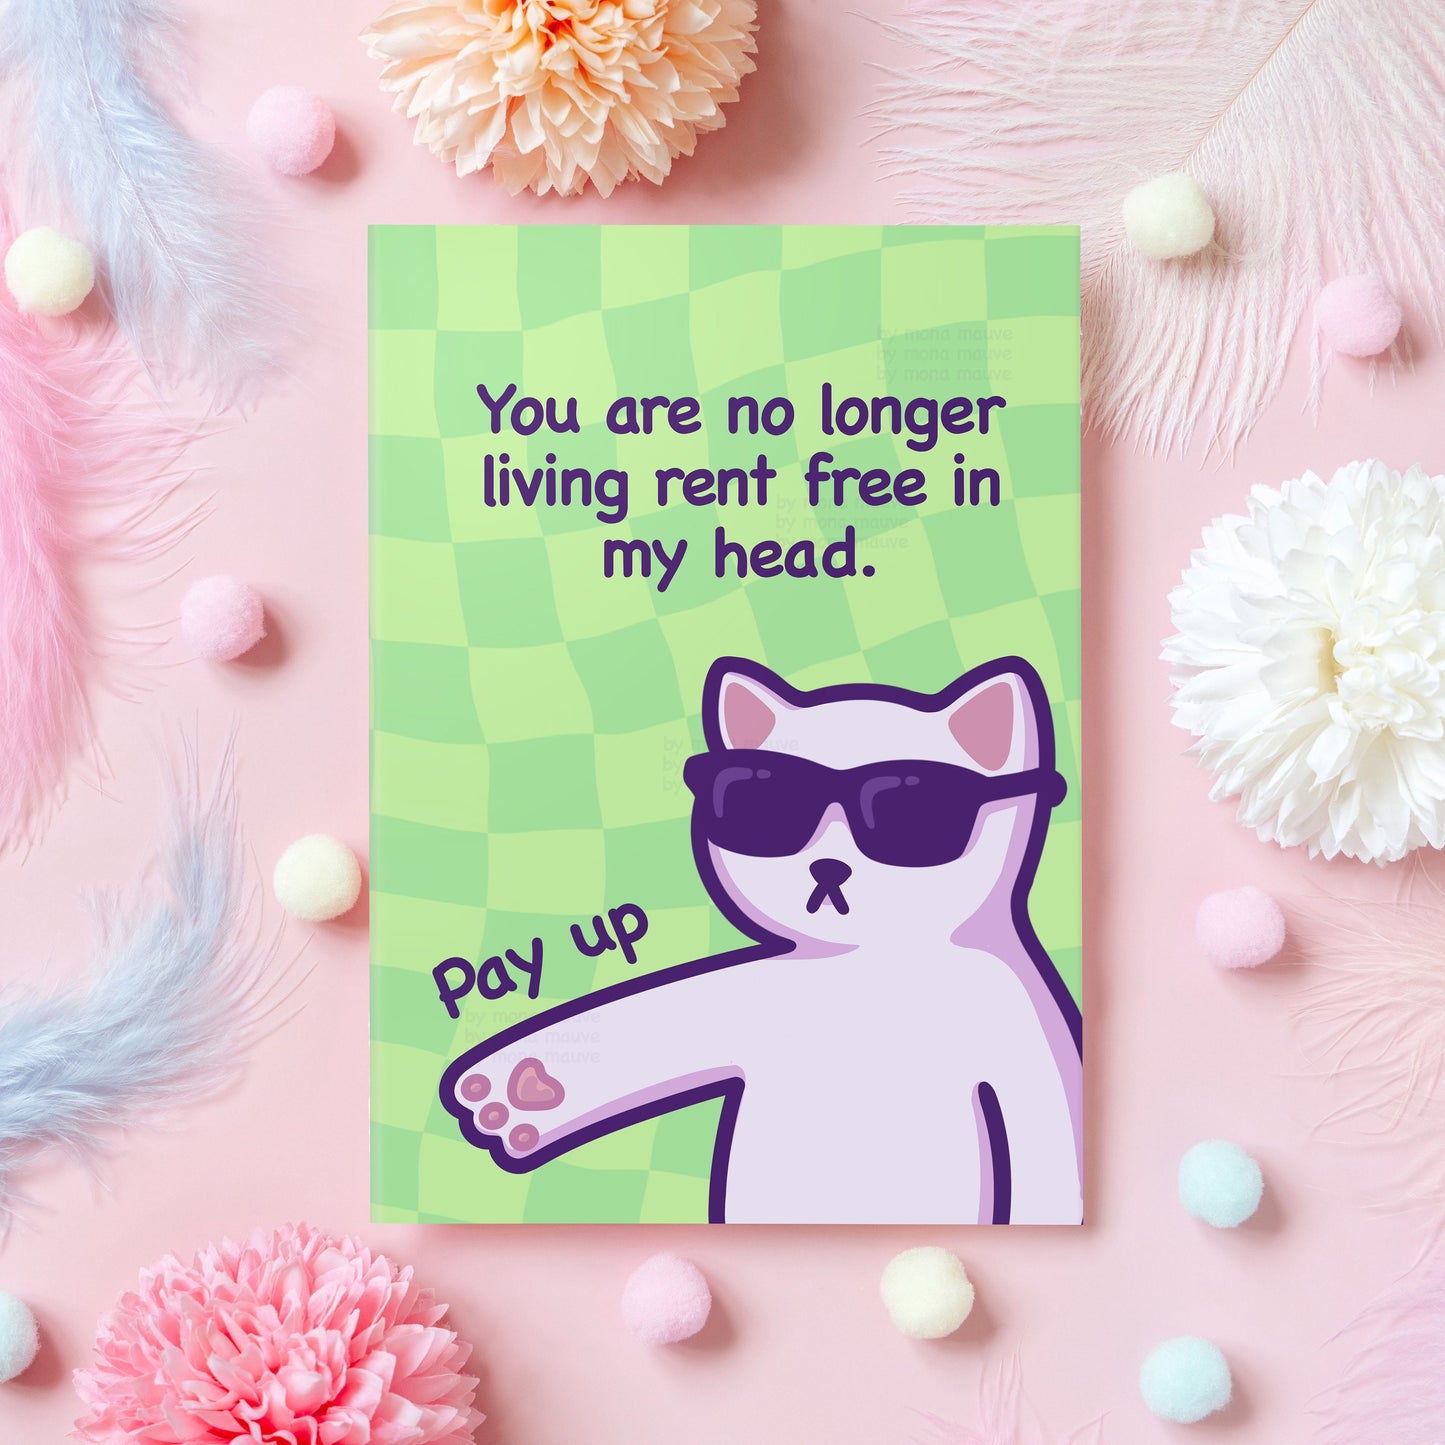 Funny Anniversary Card | Living Rent Free in My Head | Humorous Anniversary Card | For Husband, Wife, Boyfriend, Girlfriend - Her or Him